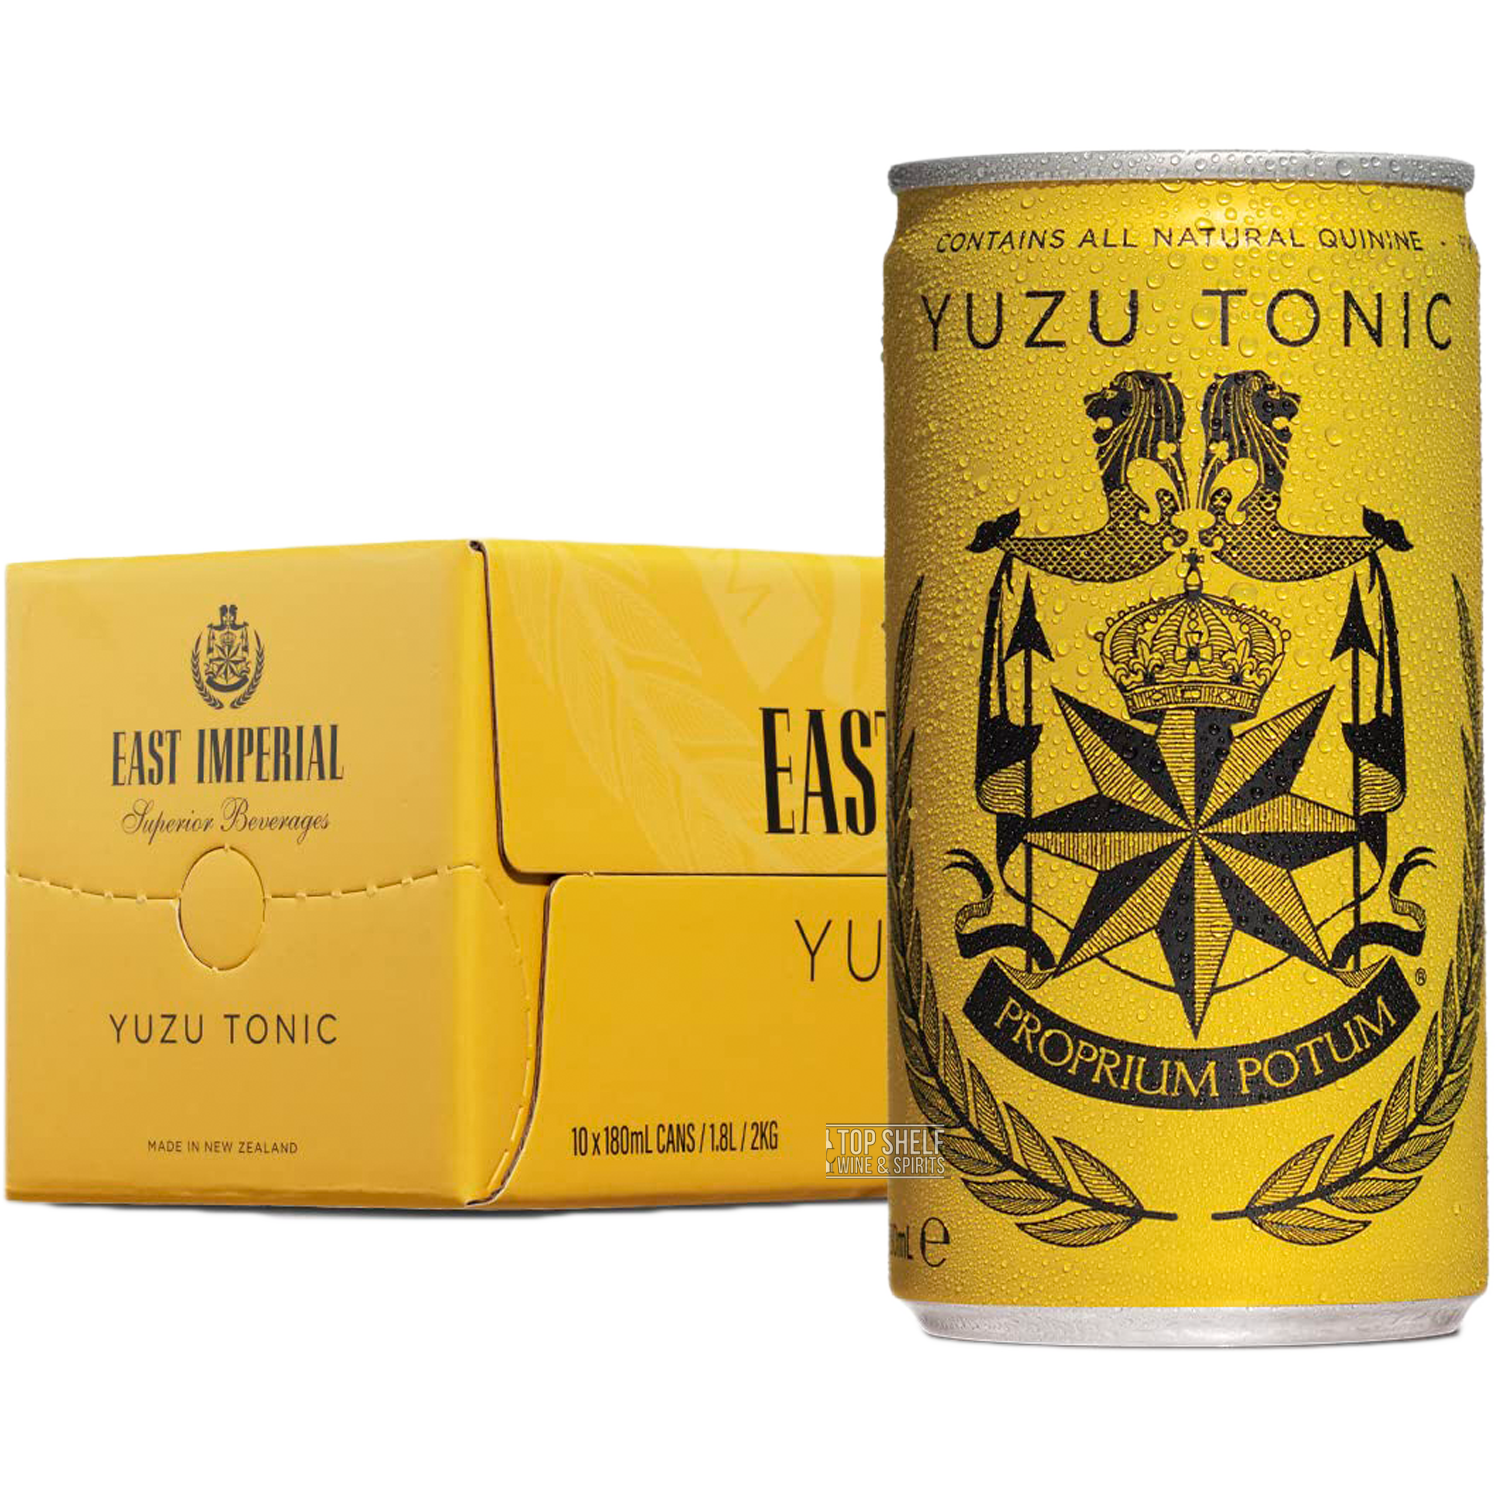 East Imperial Yuzu Tonic (10 Pack Cans)